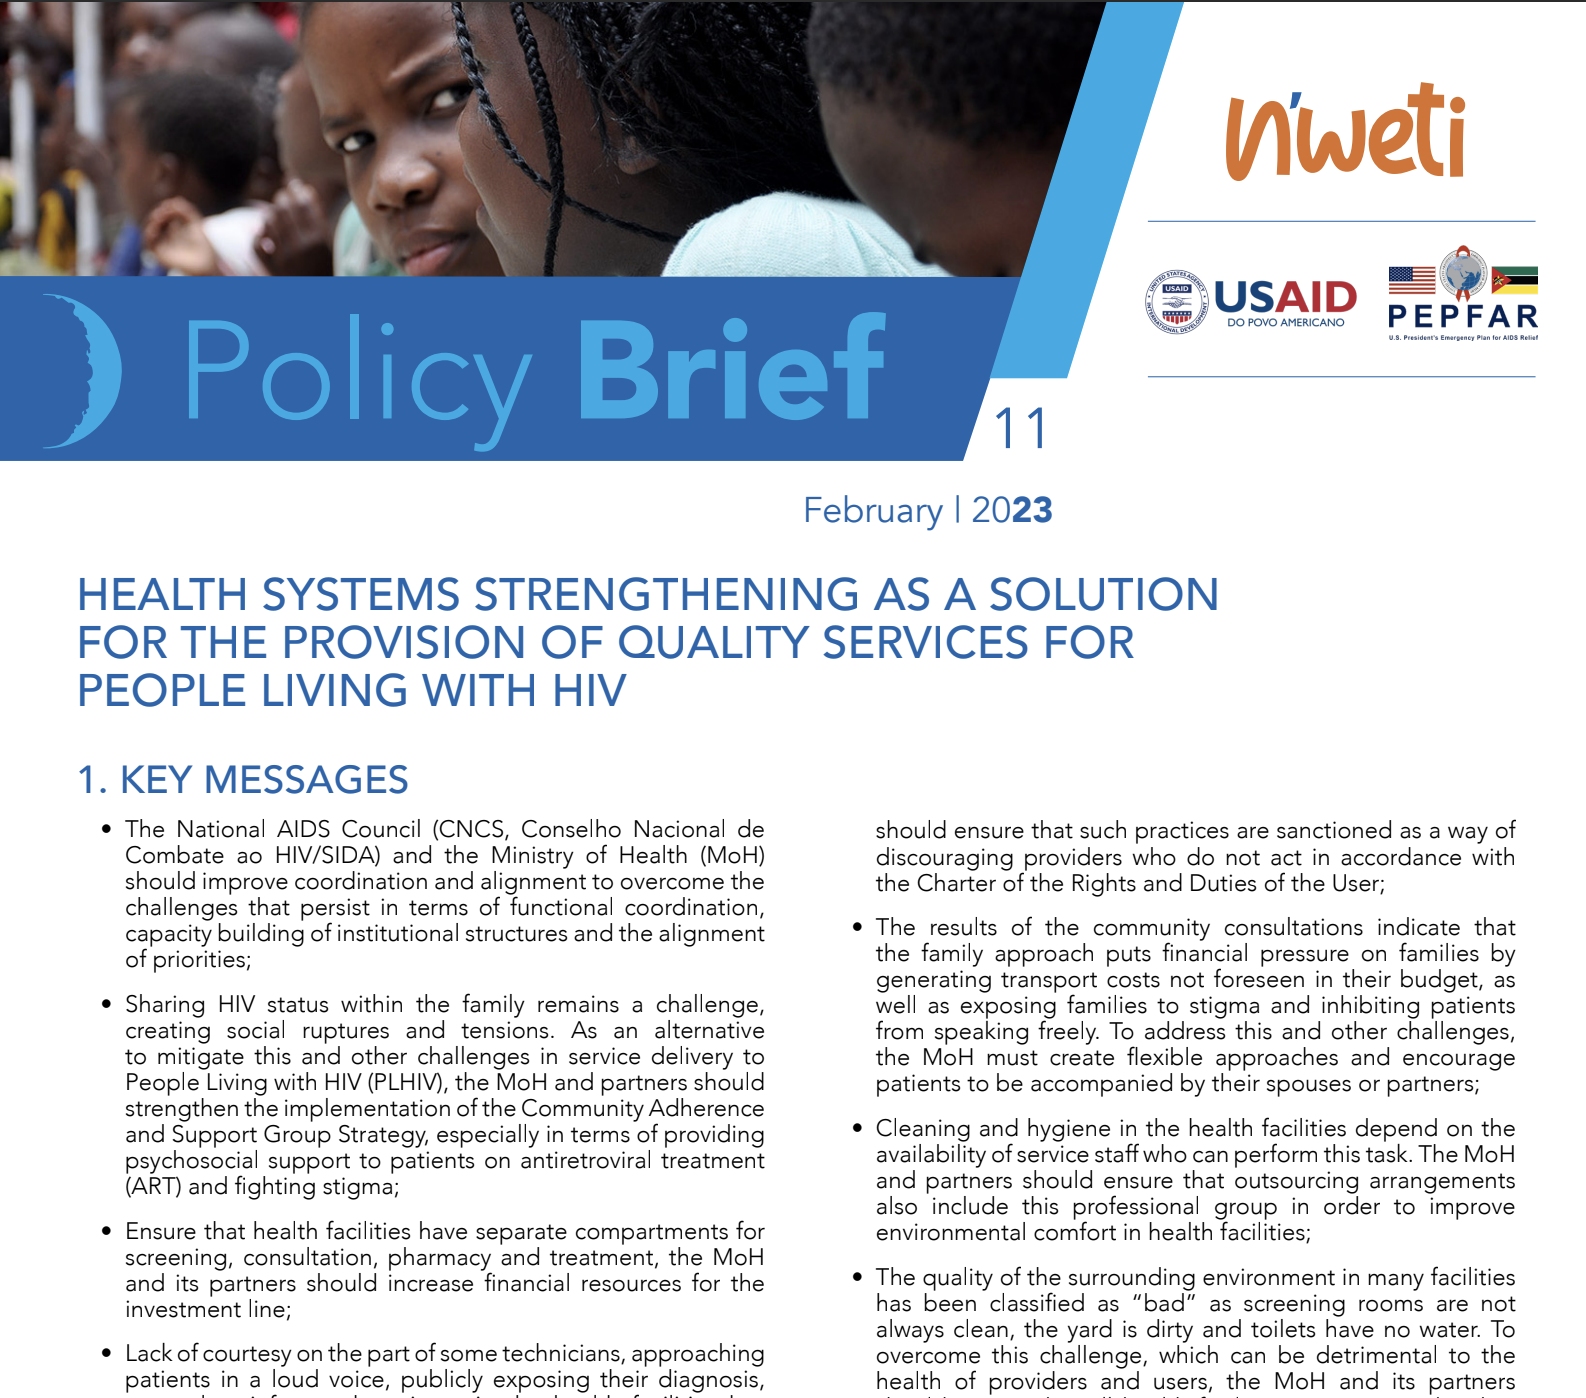 Health systems strengthening as a solution for the provision of quality services for People Living with HIV